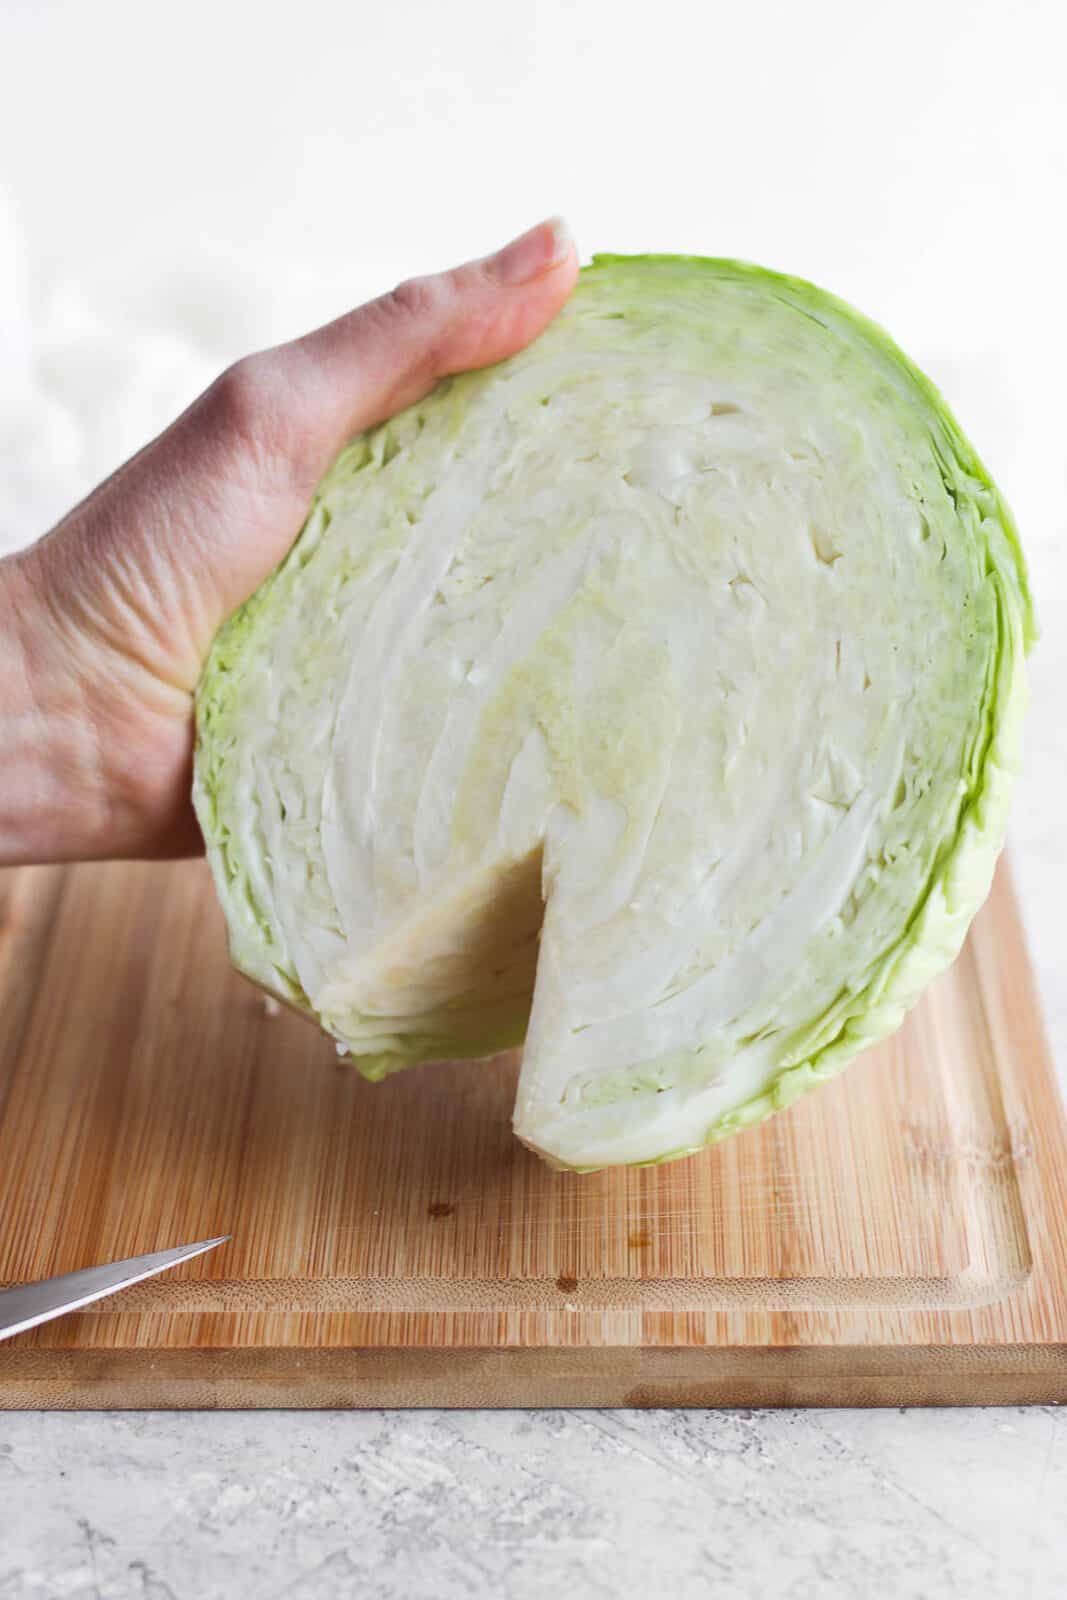 A hand holding a cabbage half with the core removed.